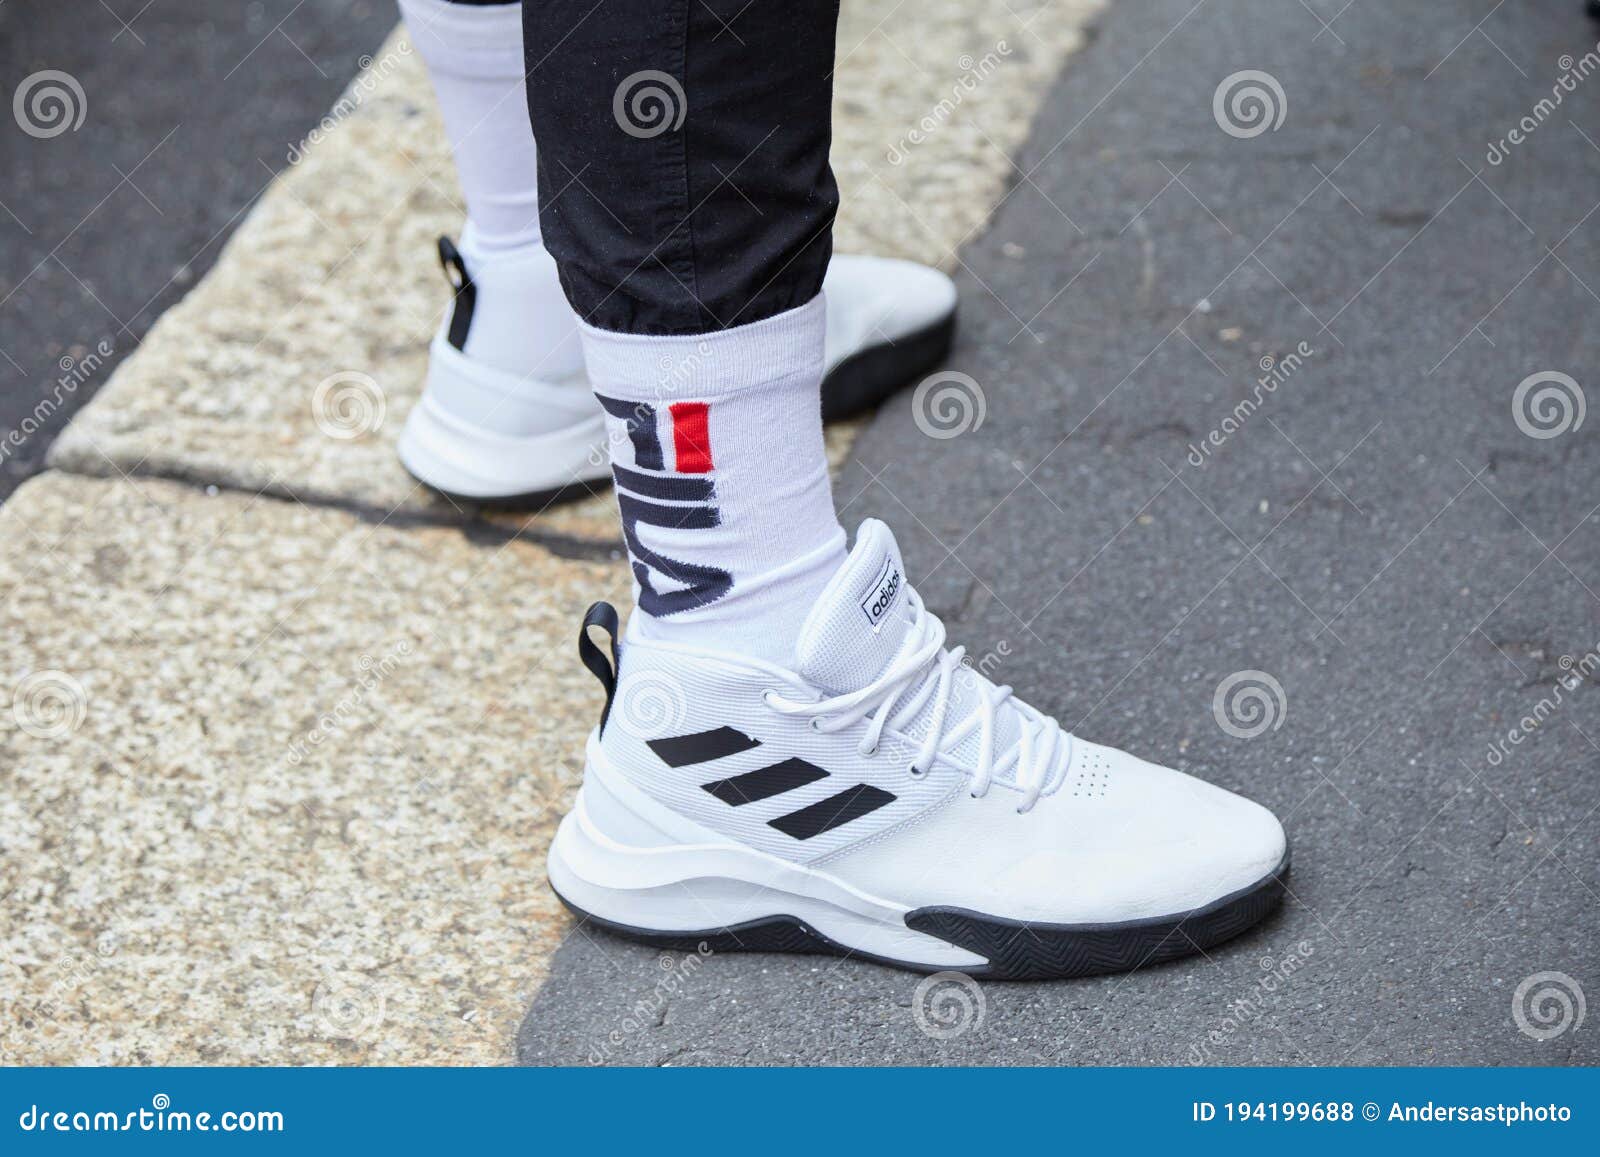 Man with White and Black Adidas Sneakers and Fila Socks before Boss ...